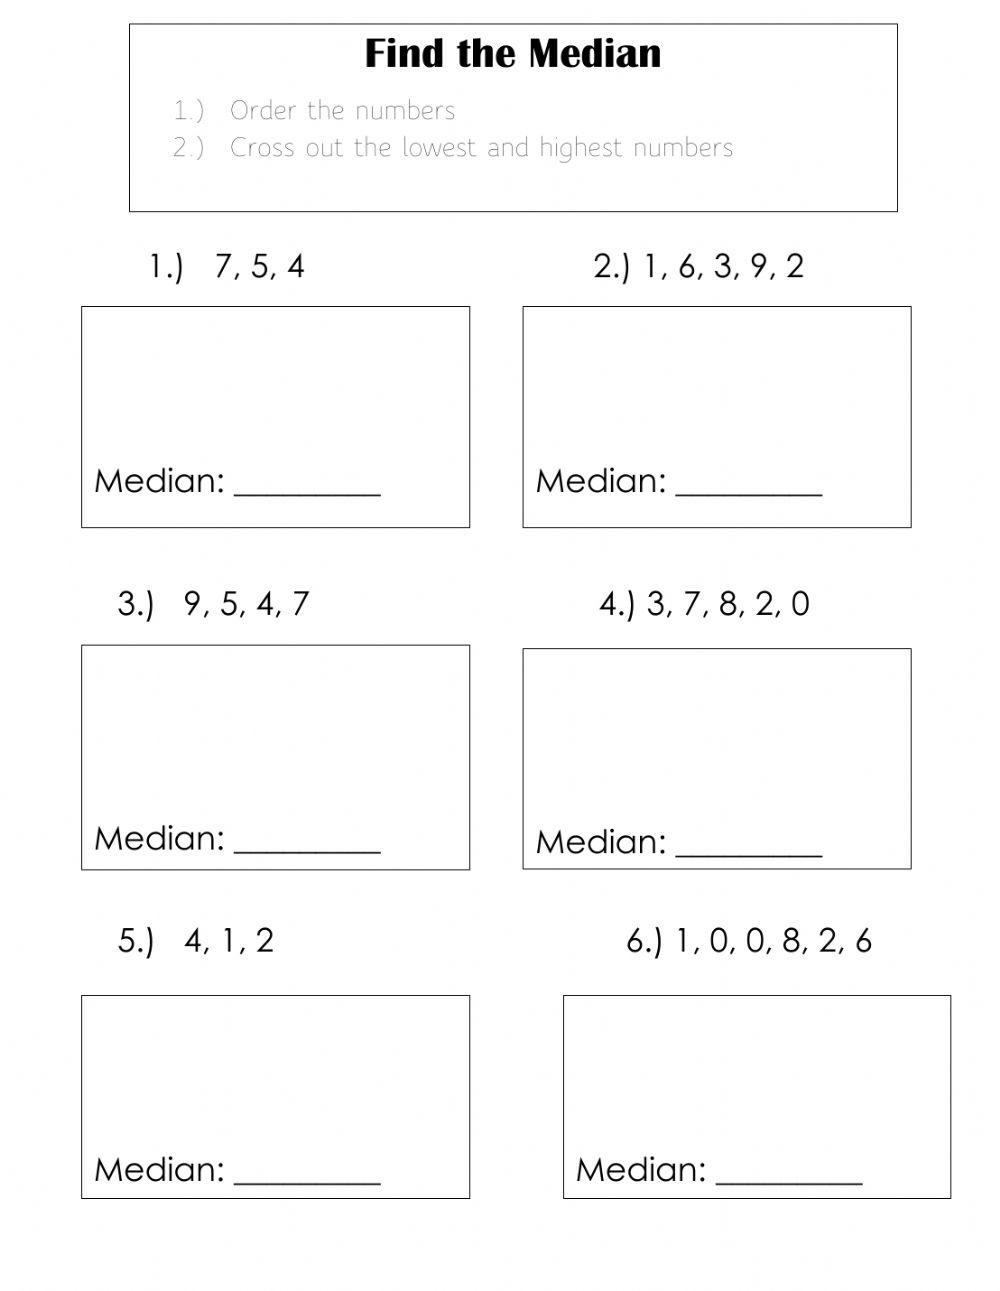 Finding the Median